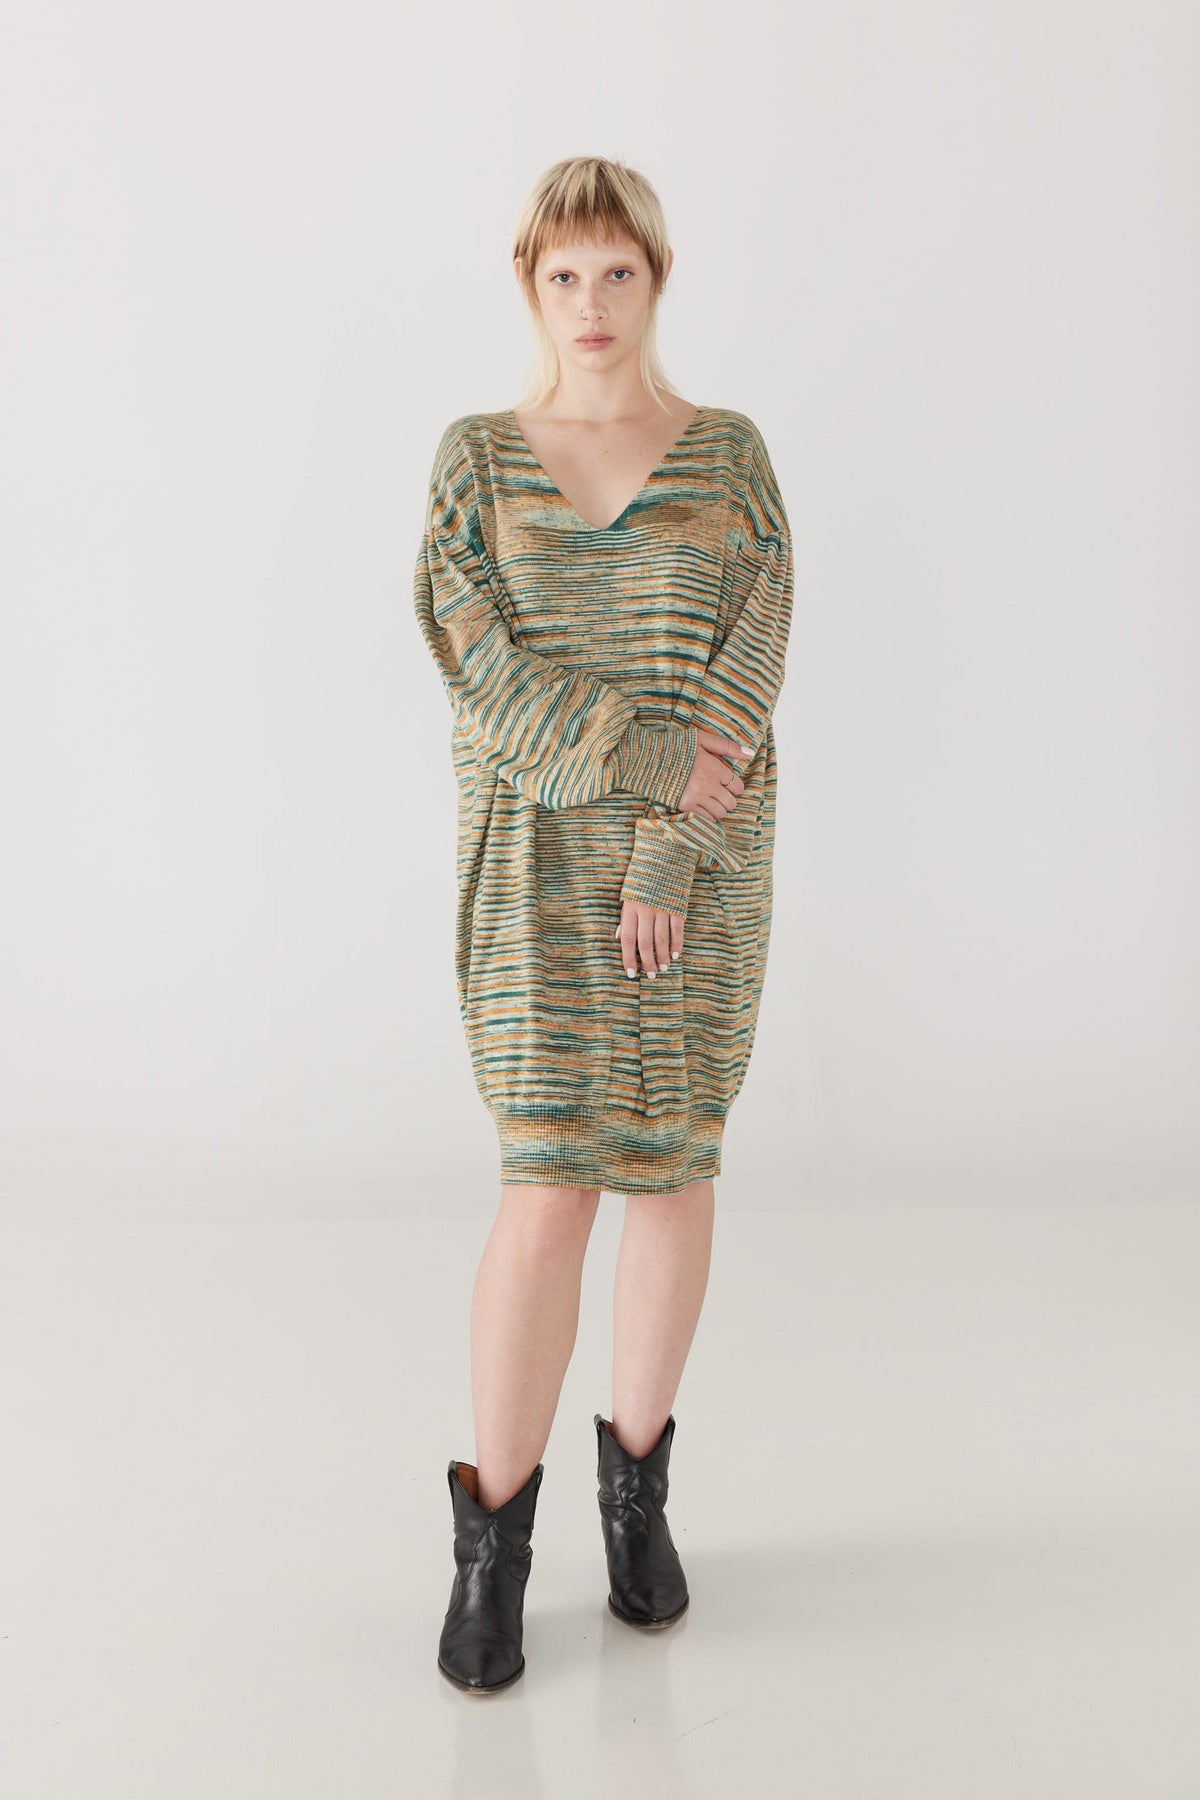 Adult Cotton Jersey Penelope Dress - Peacock Space Dye+Model is 5&#39;7&quot; | 34&quot; Bust | 26.5&quot; Waist | 36.25&quot; Hips | size 4, wearing a size X-Small/Small